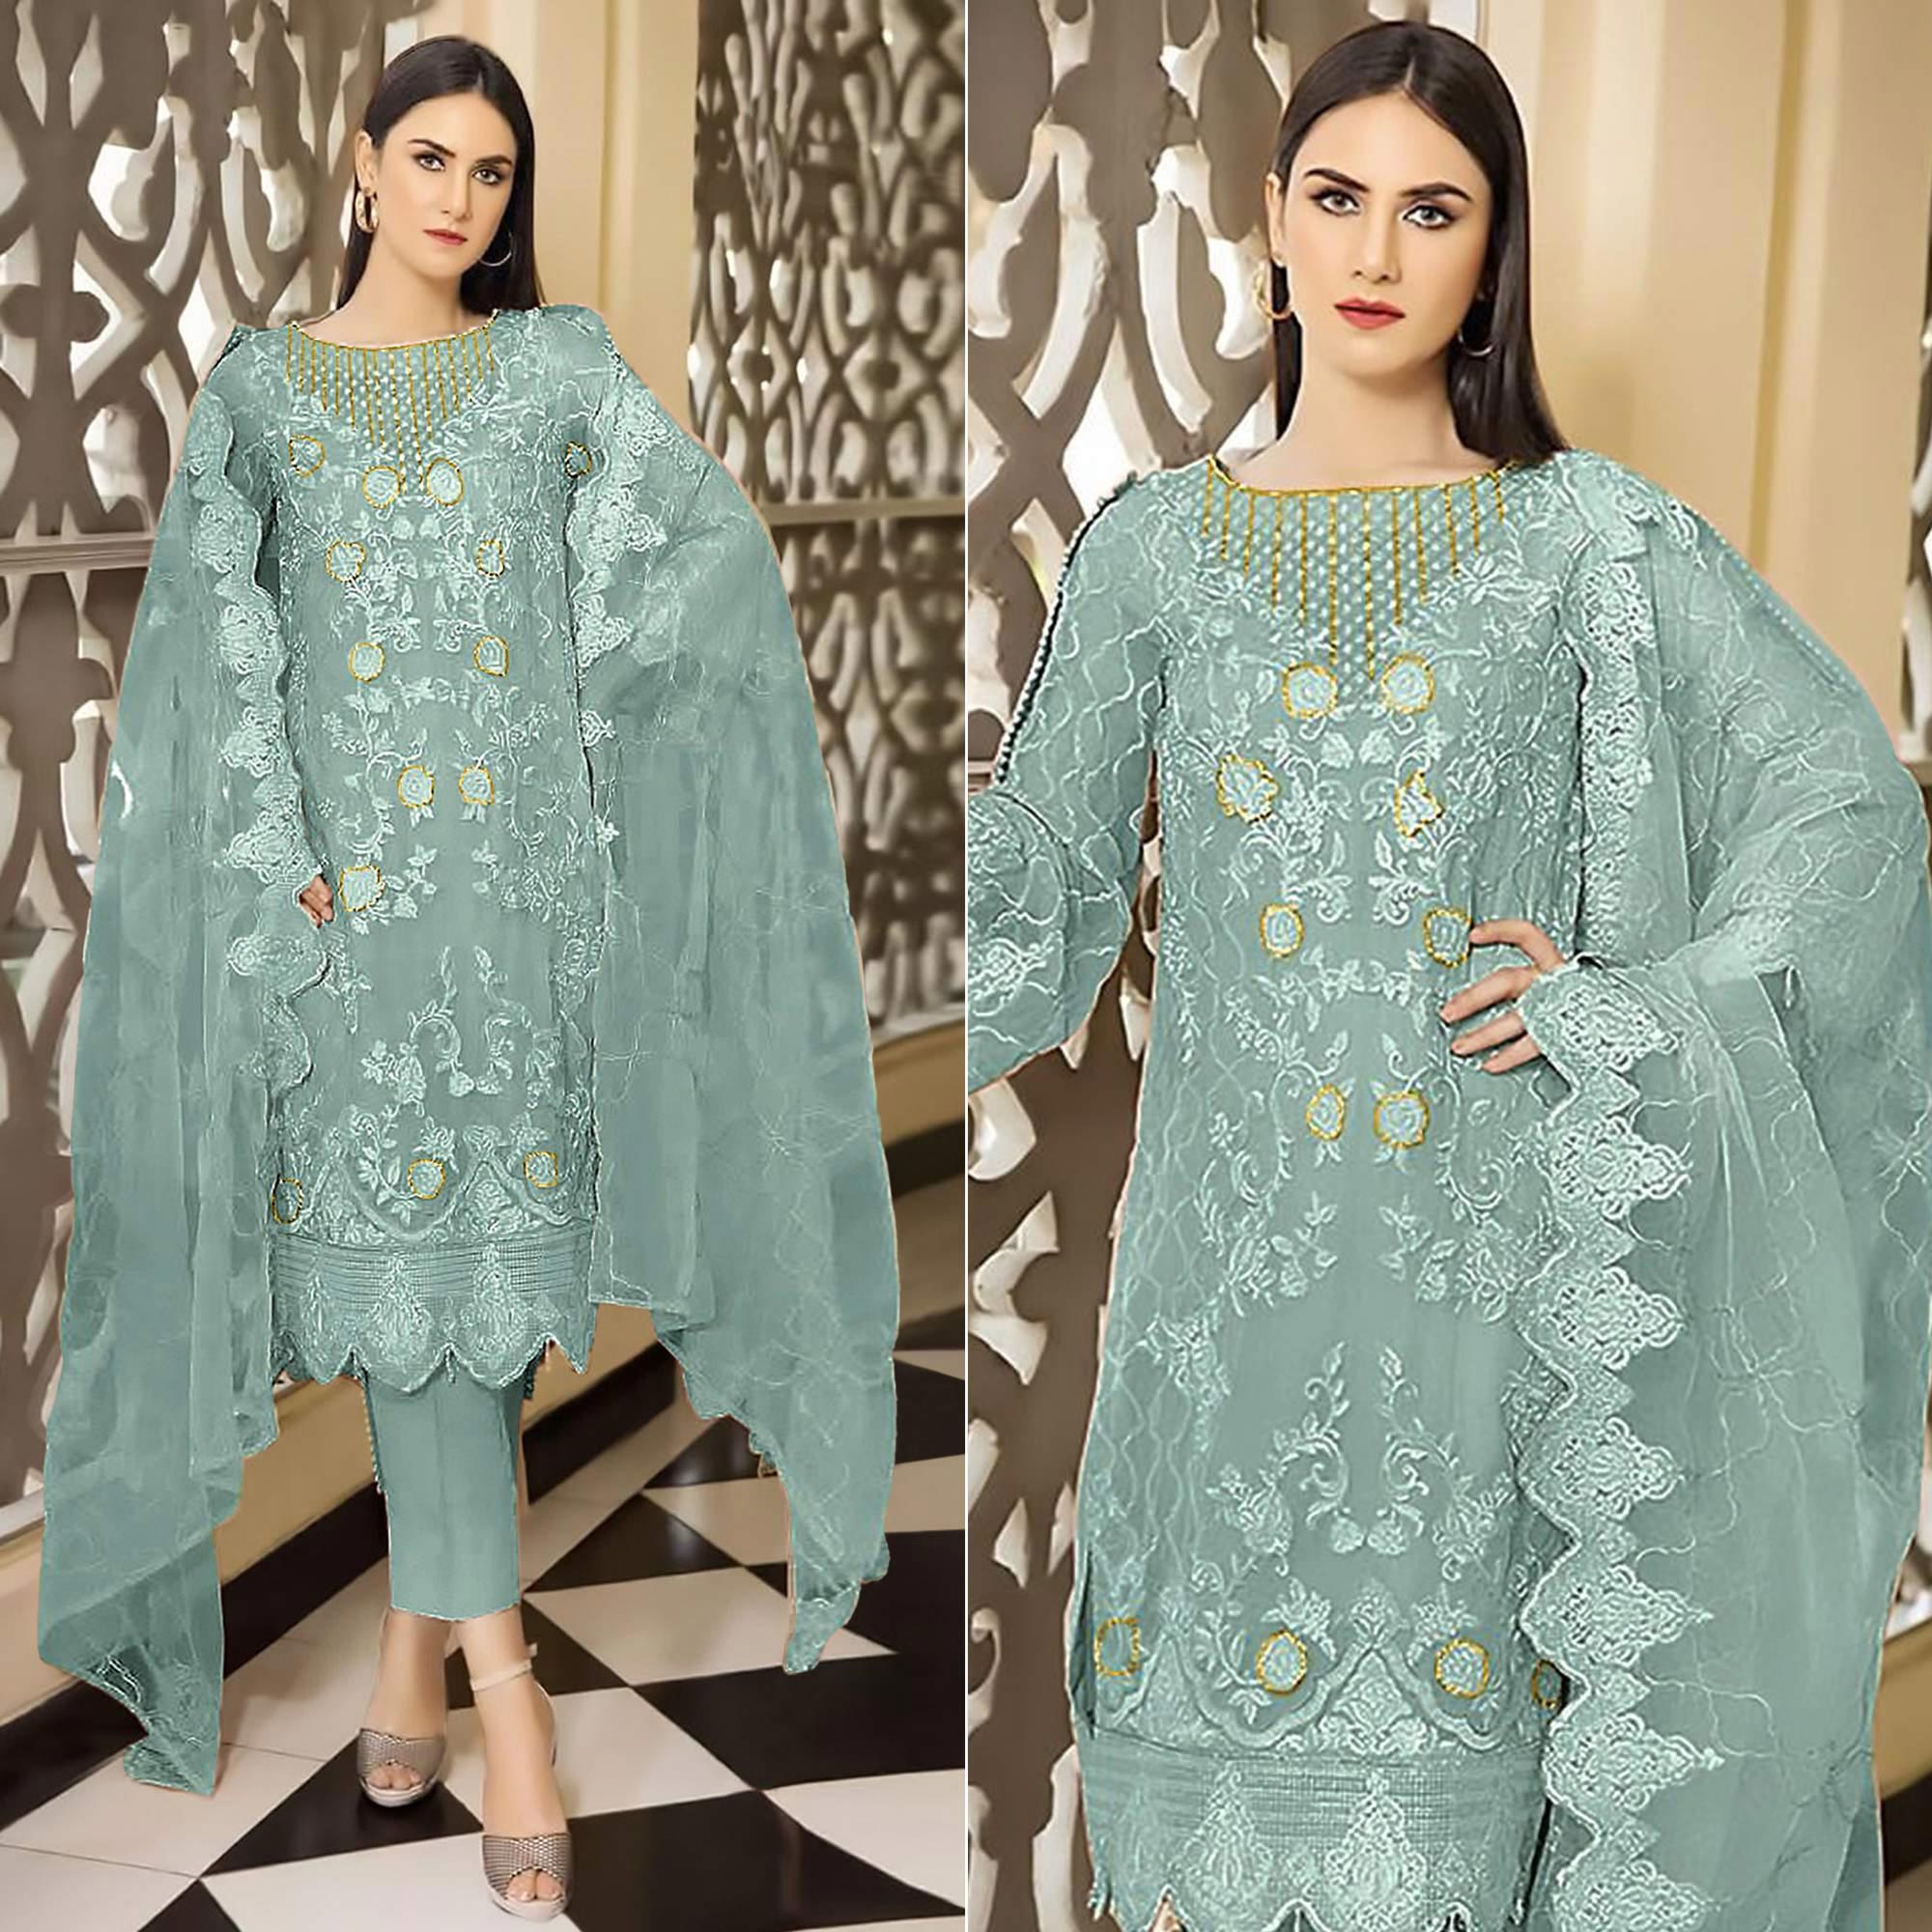 Light Turquoise Floral Embroidered Georgette Semi Stitched Pakistani Suit